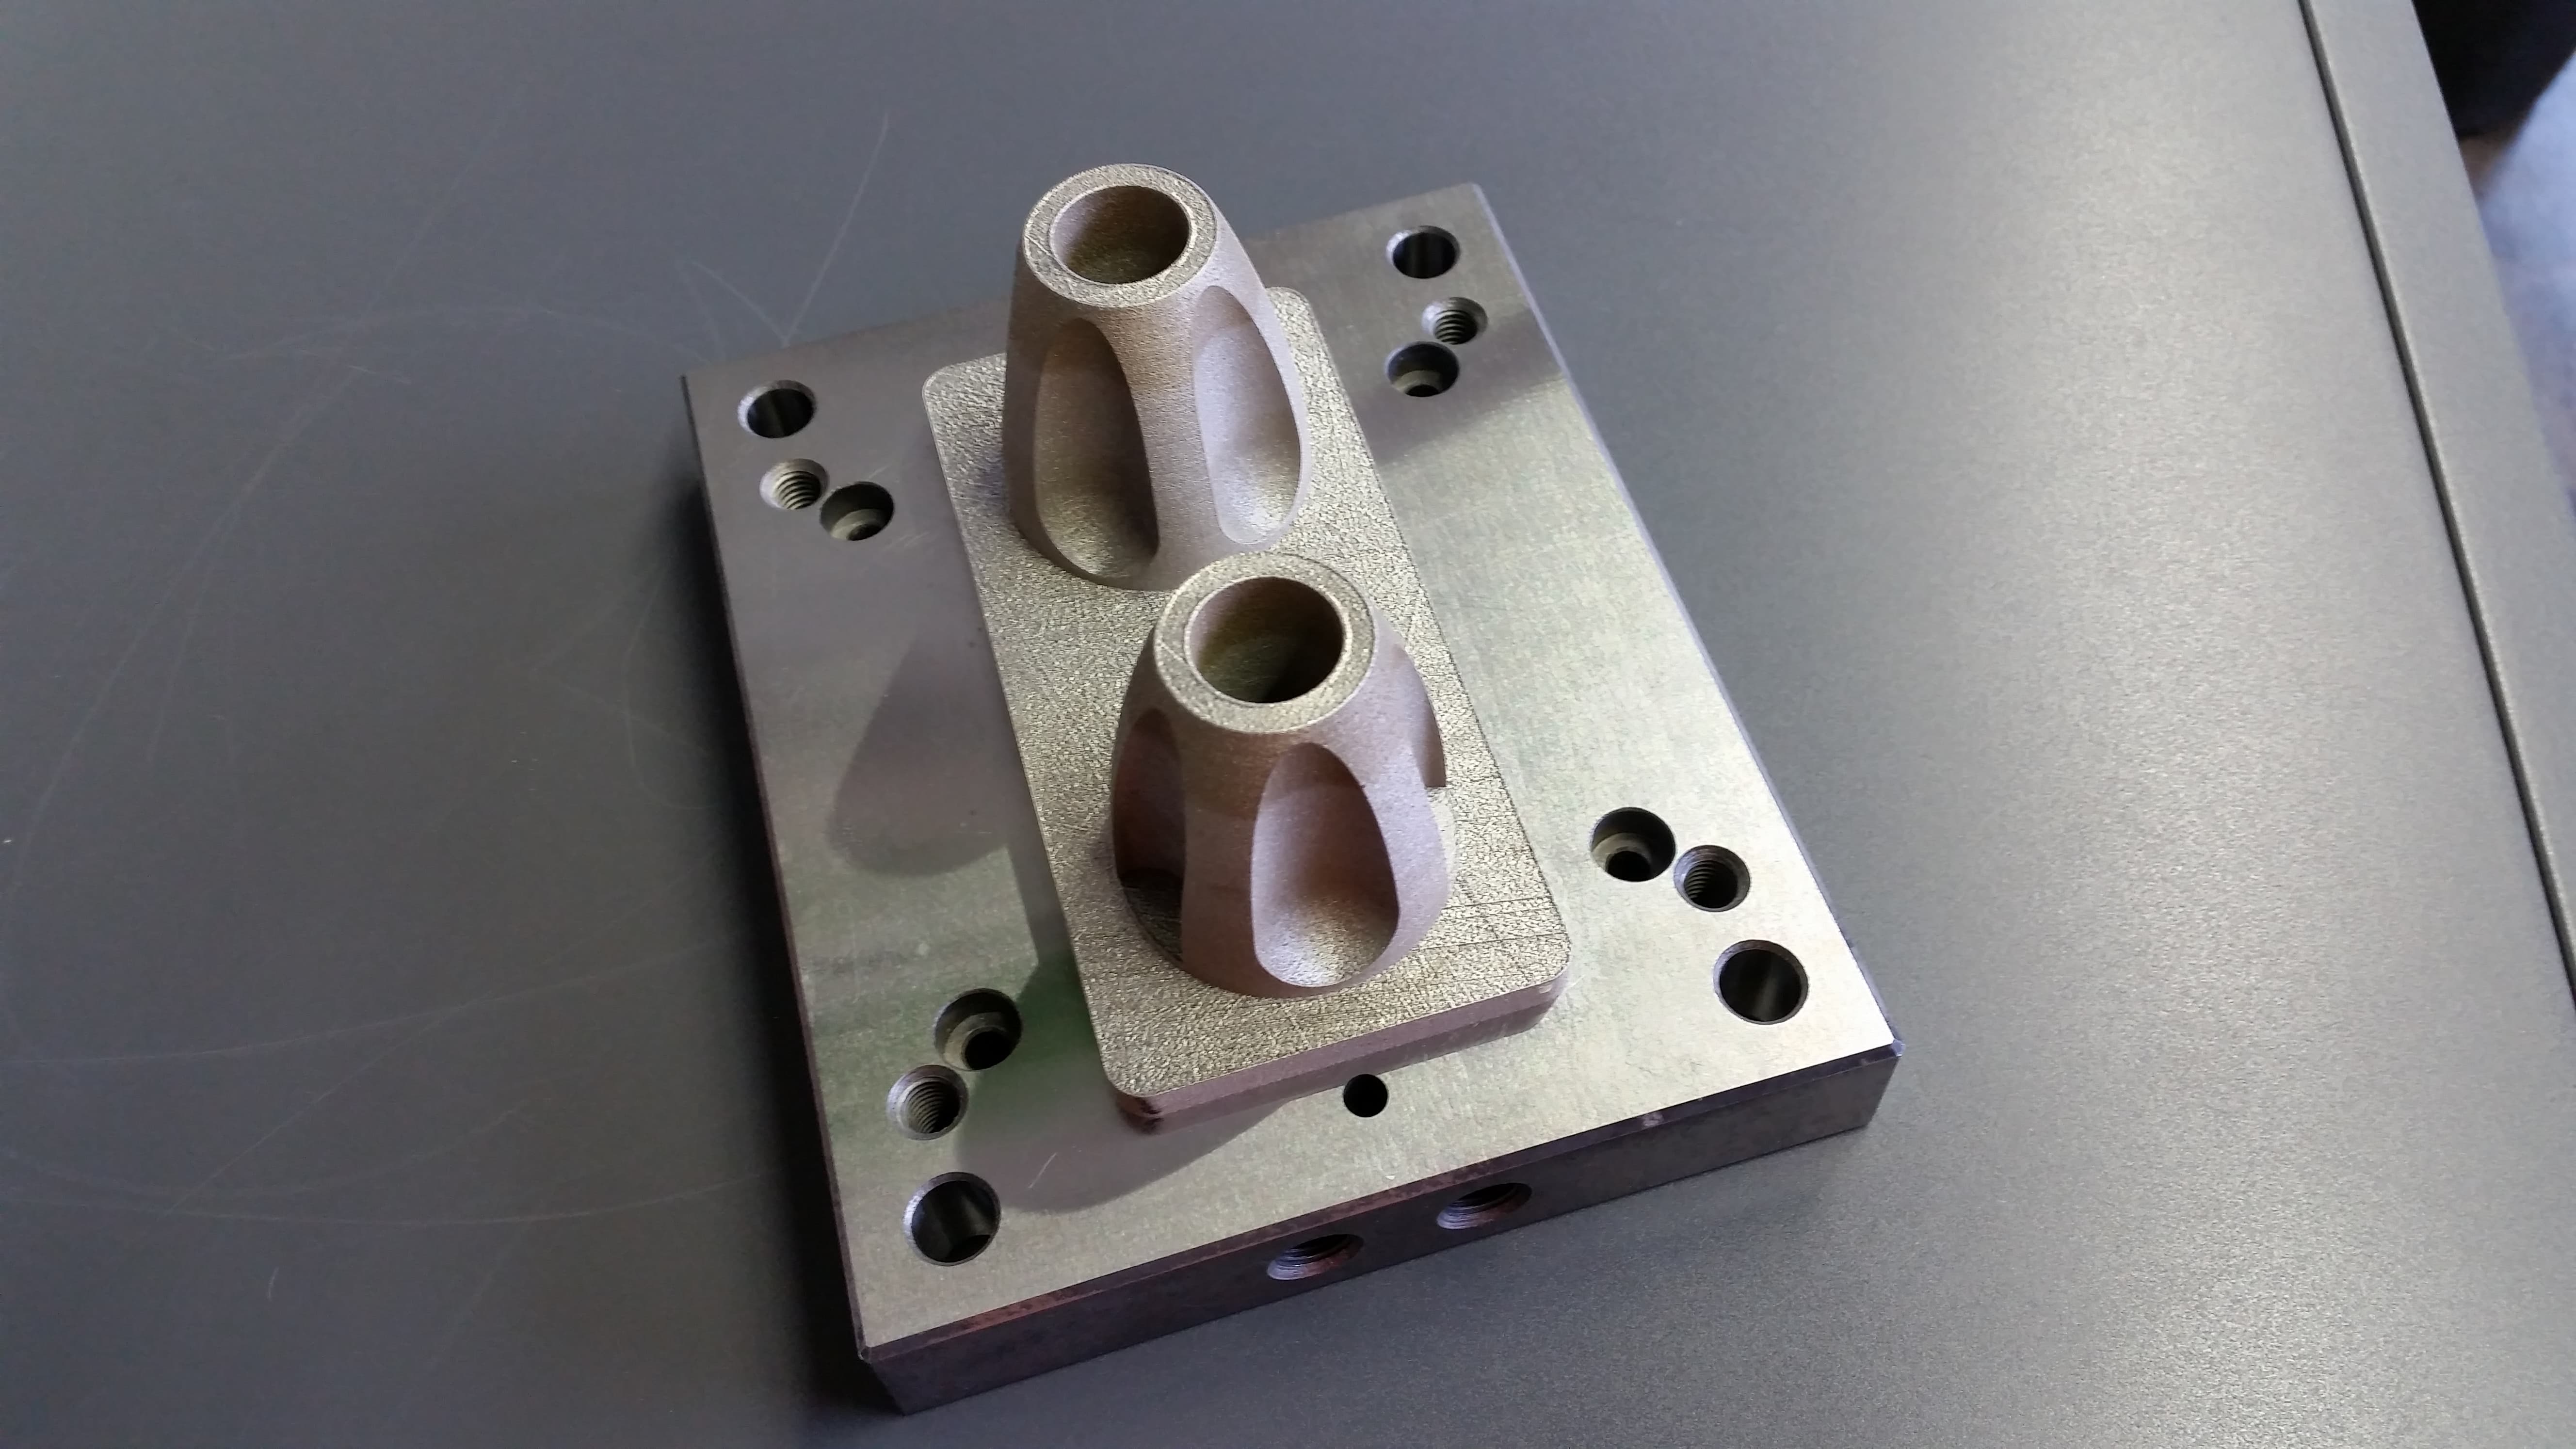 Hybrid injection mold by additive manufacturing